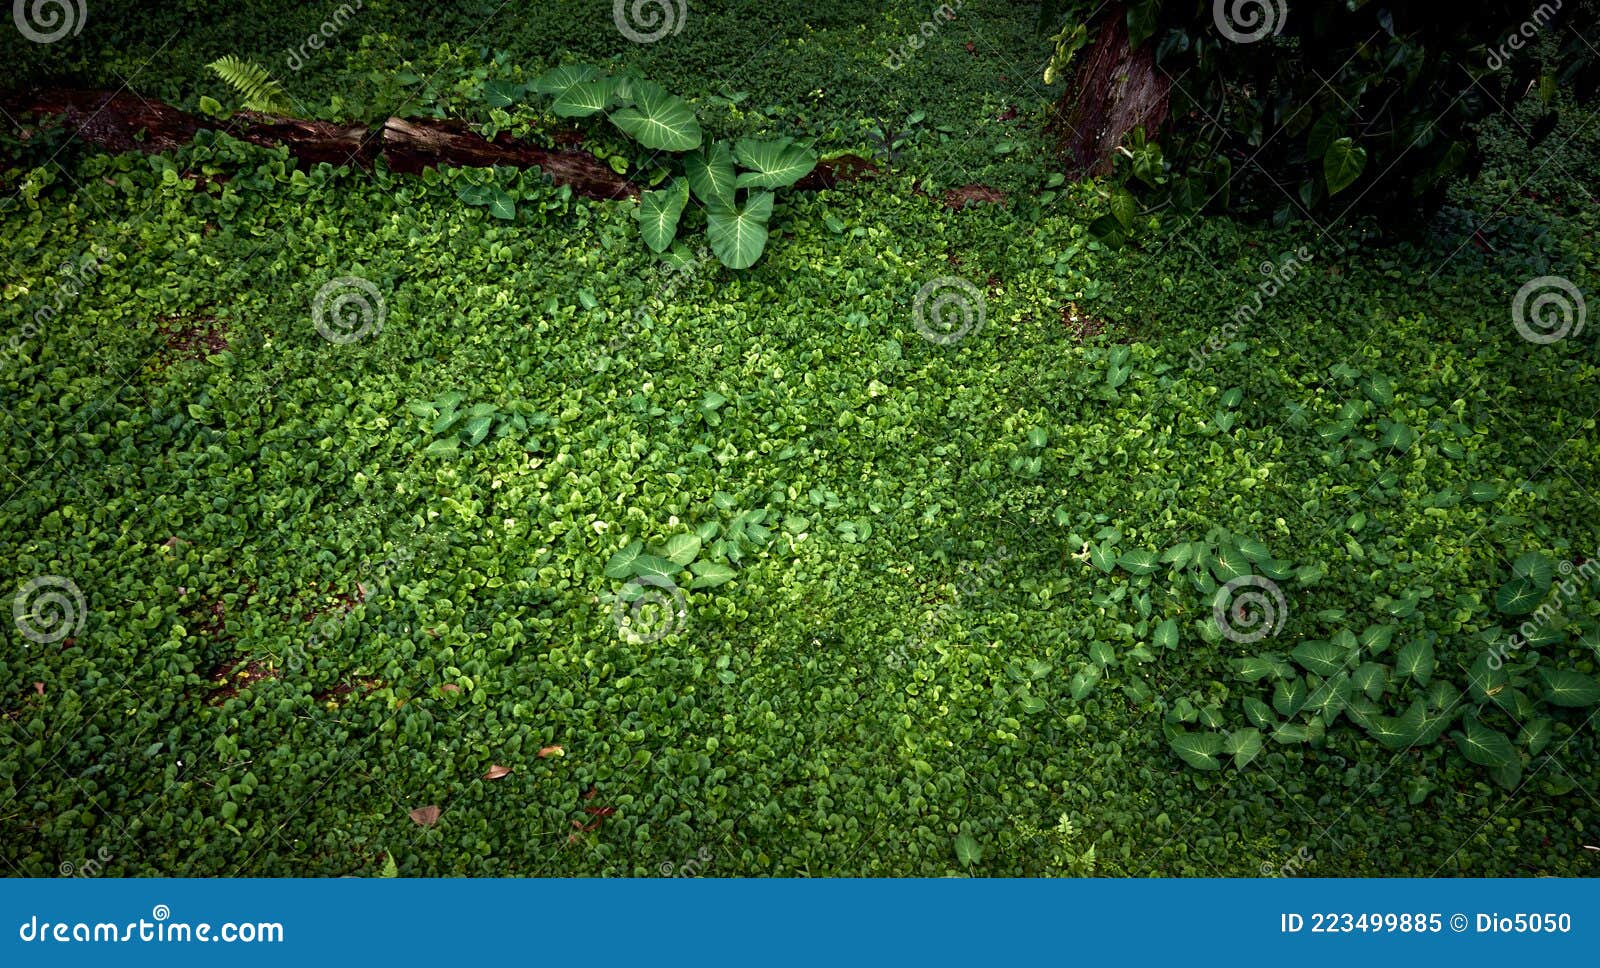 backdrop with foliage on forest floor